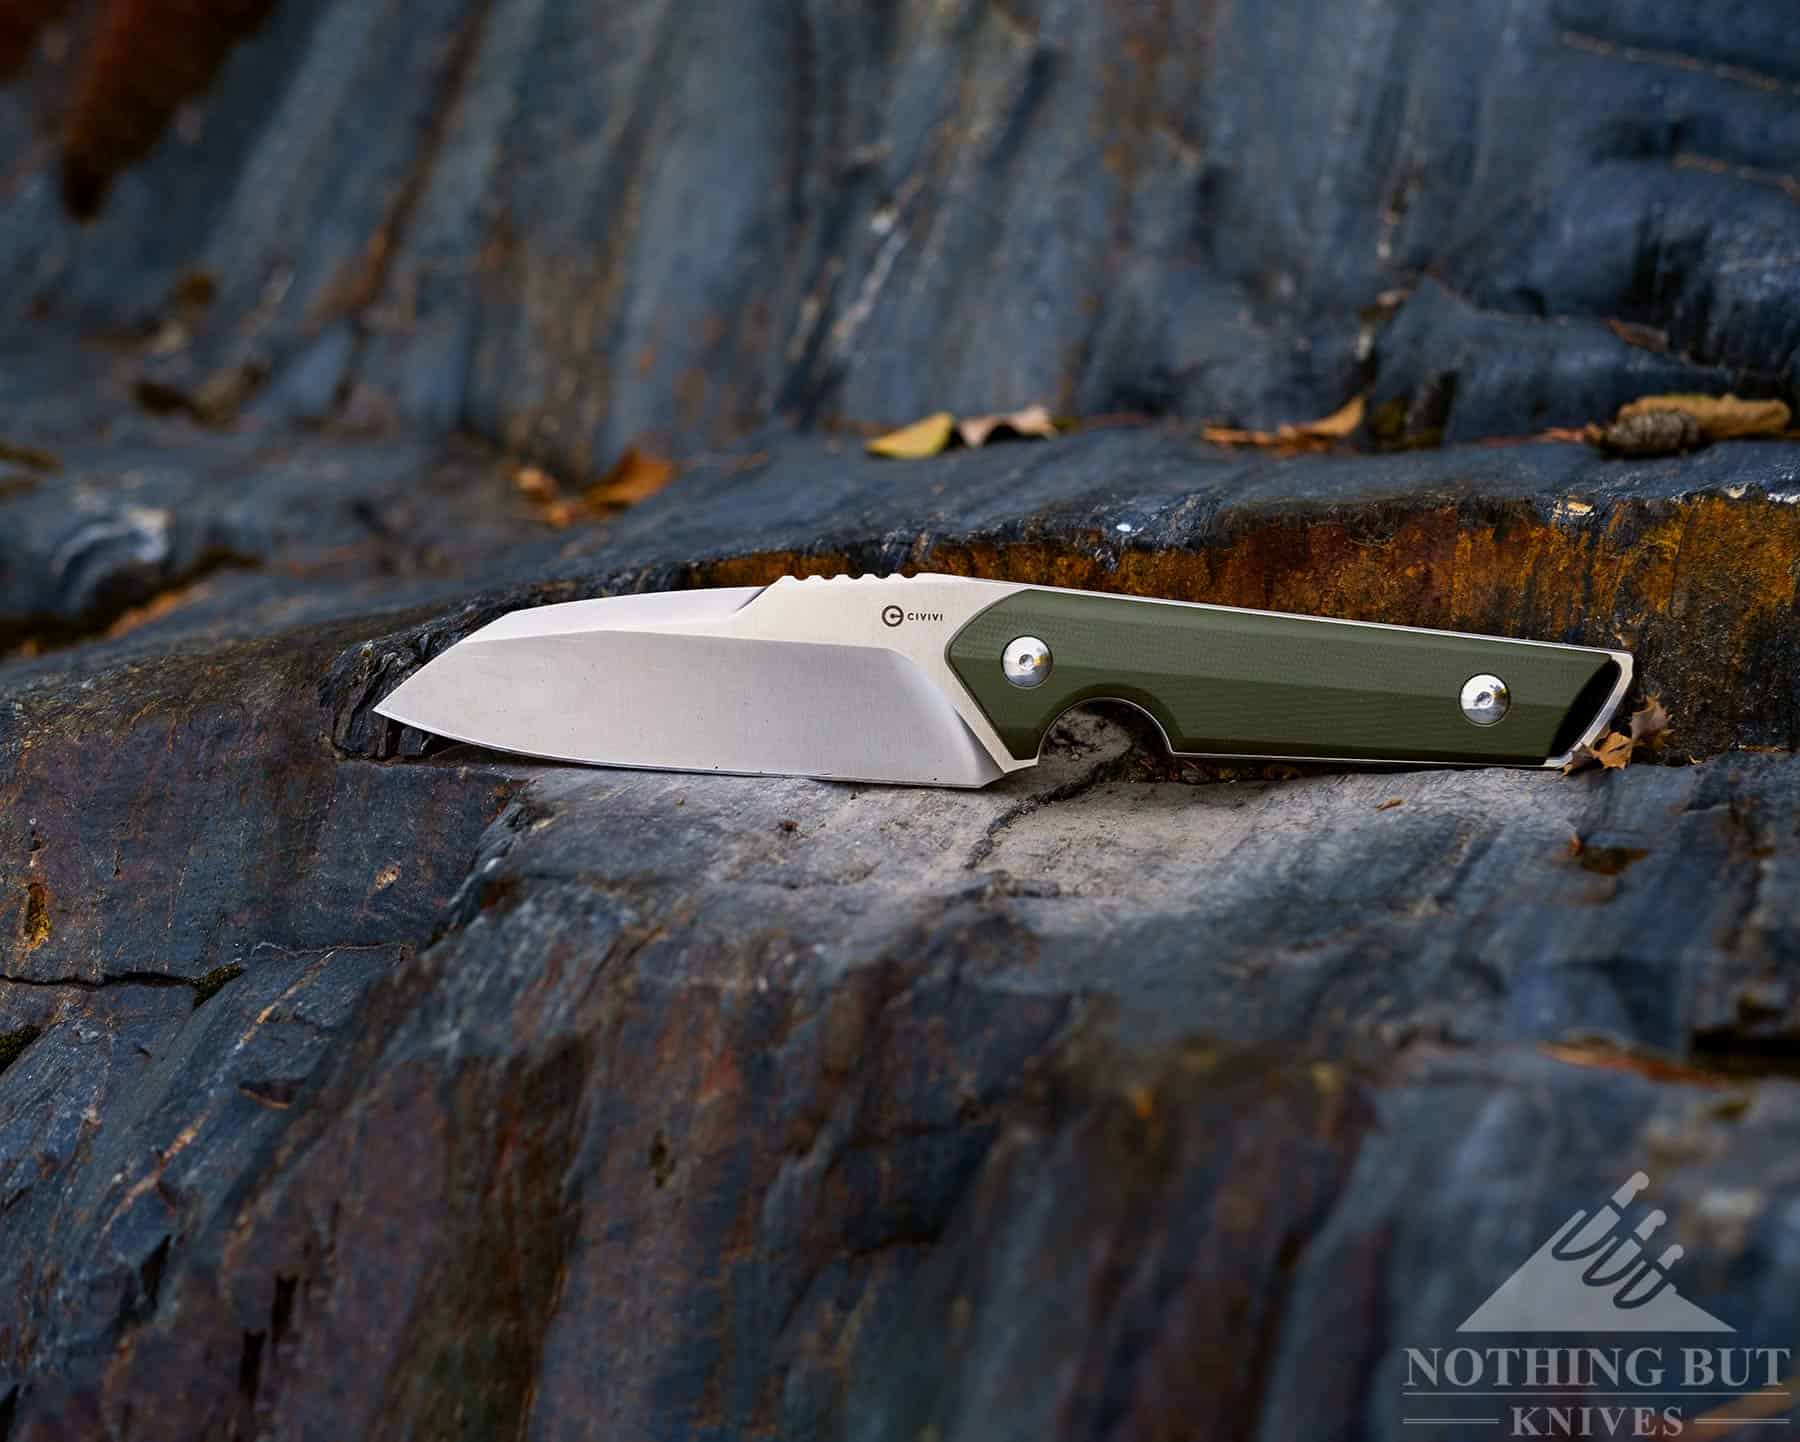 We spent several weeks testing the Civivi Kepler for this knife review. It is shown here on bedrock during one of our testing excursions.